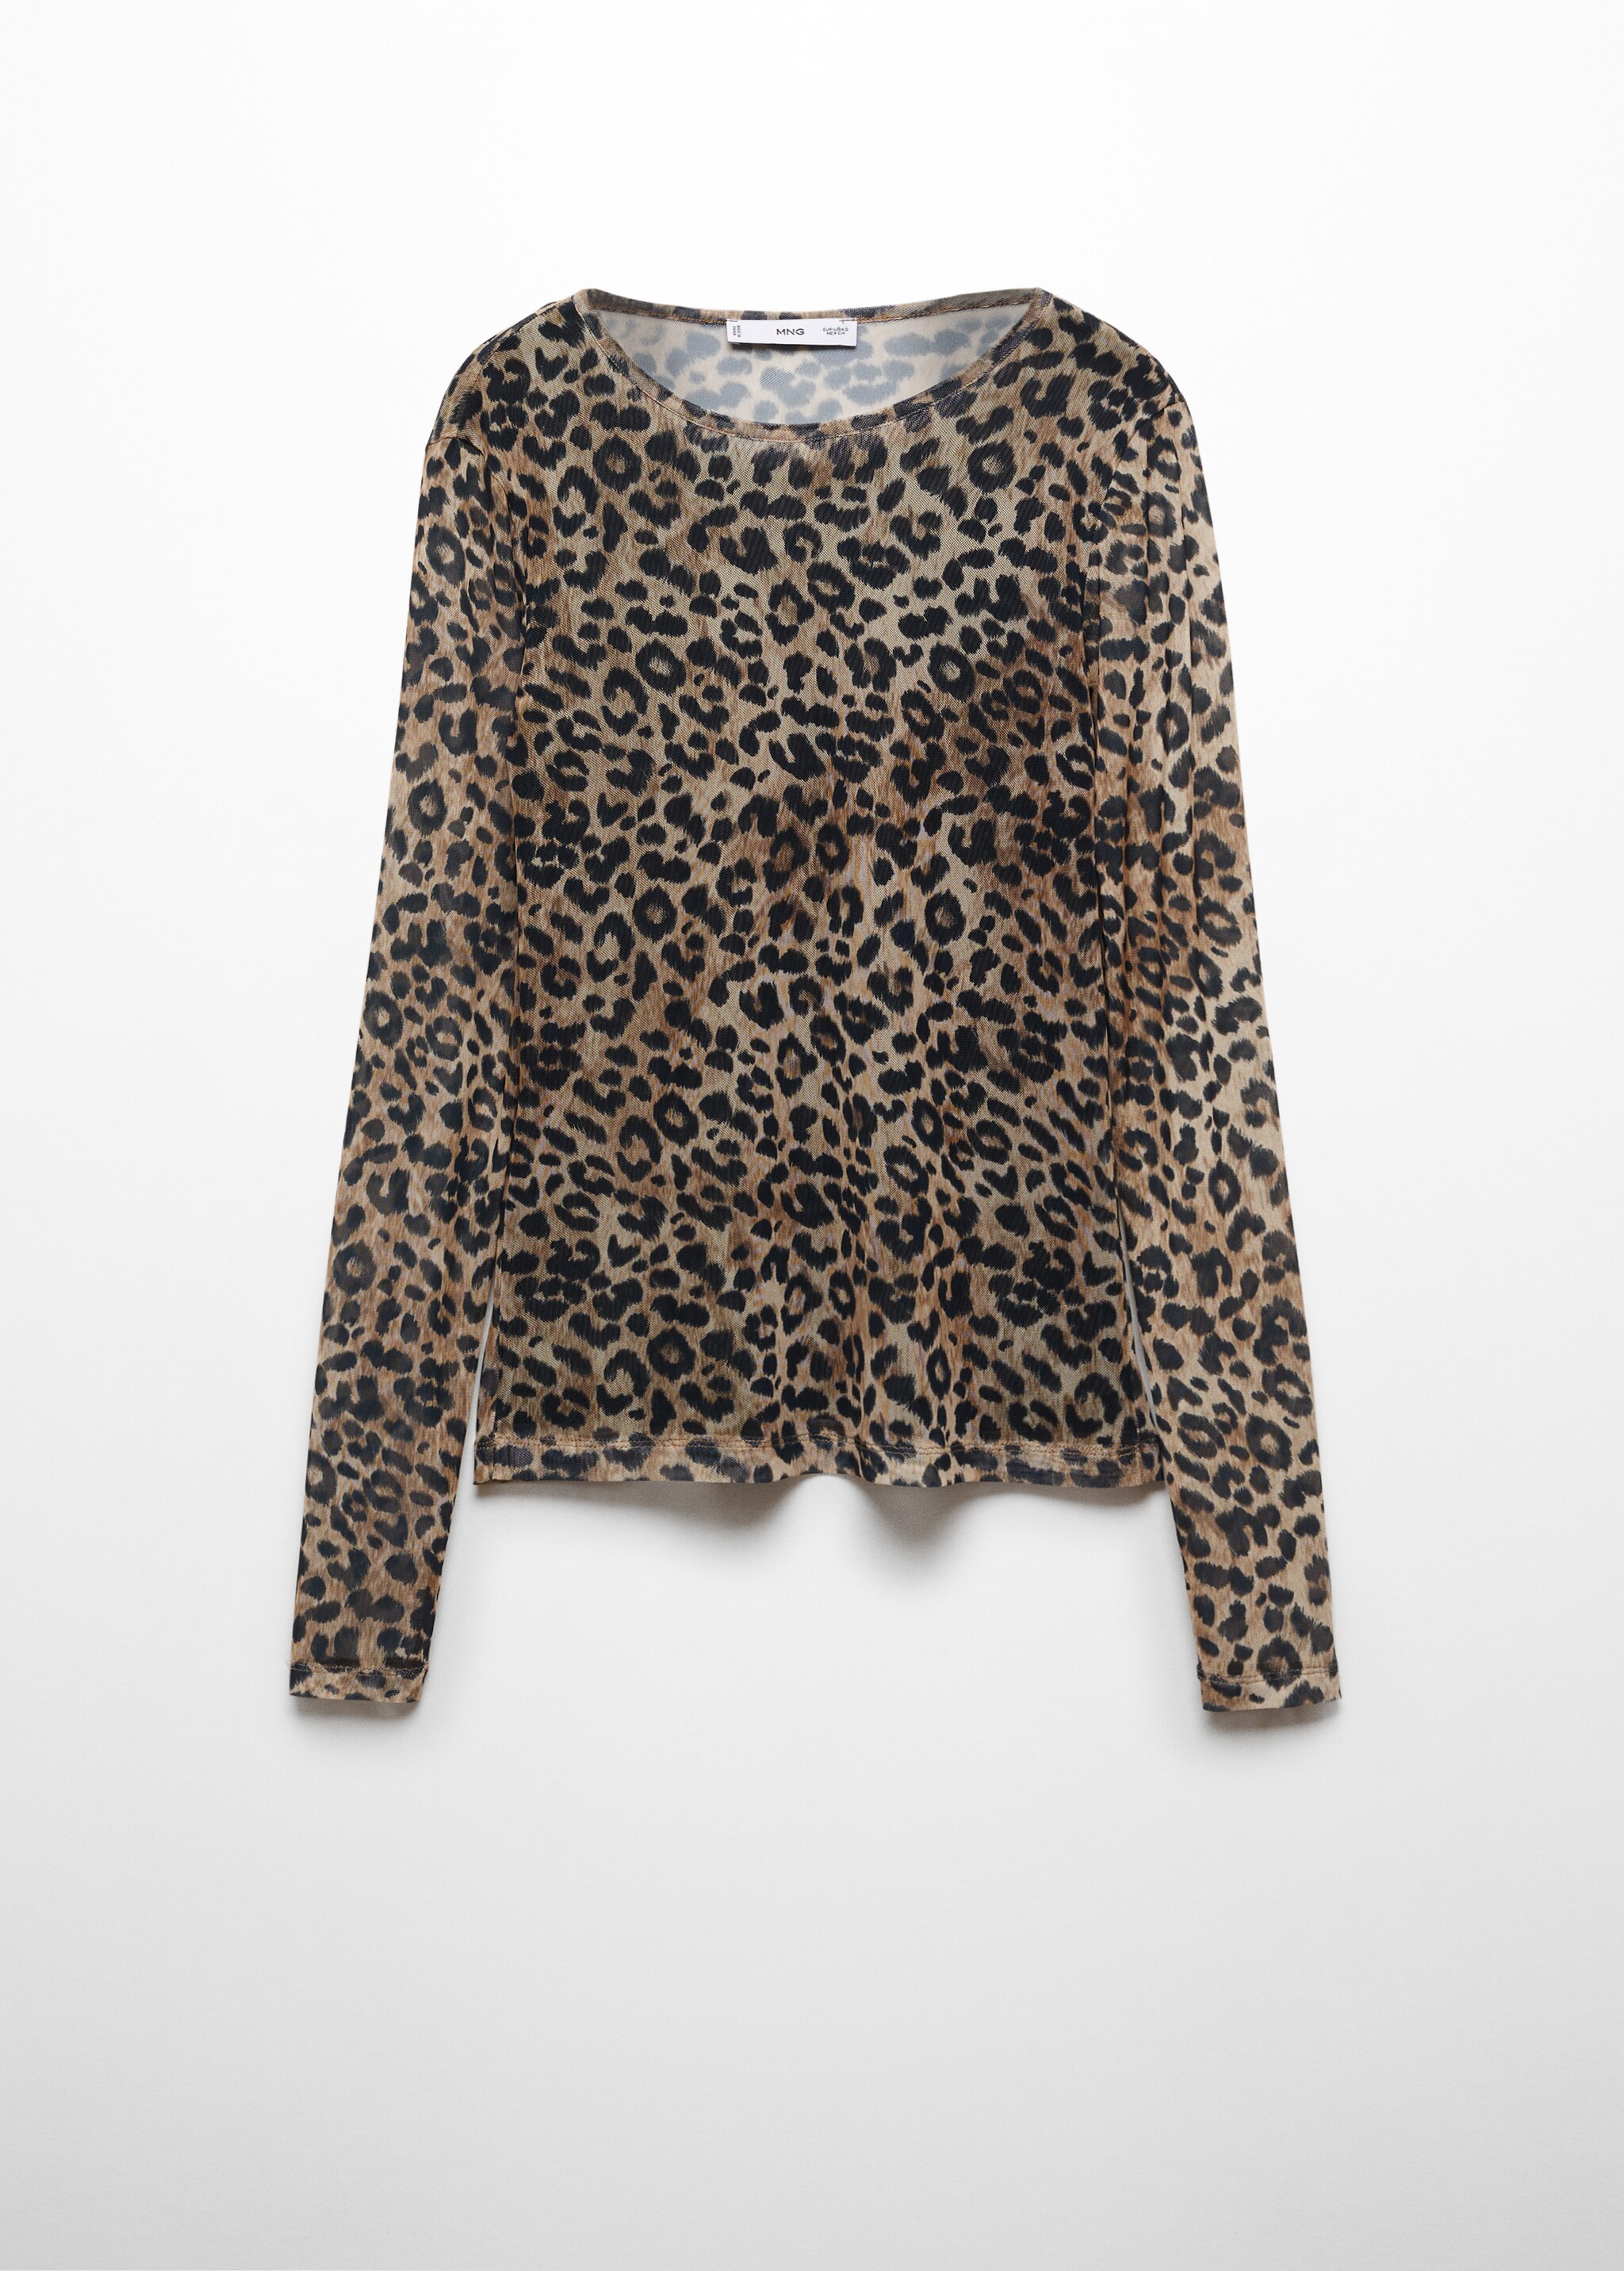 Leopard-print t-shirt - Article without model